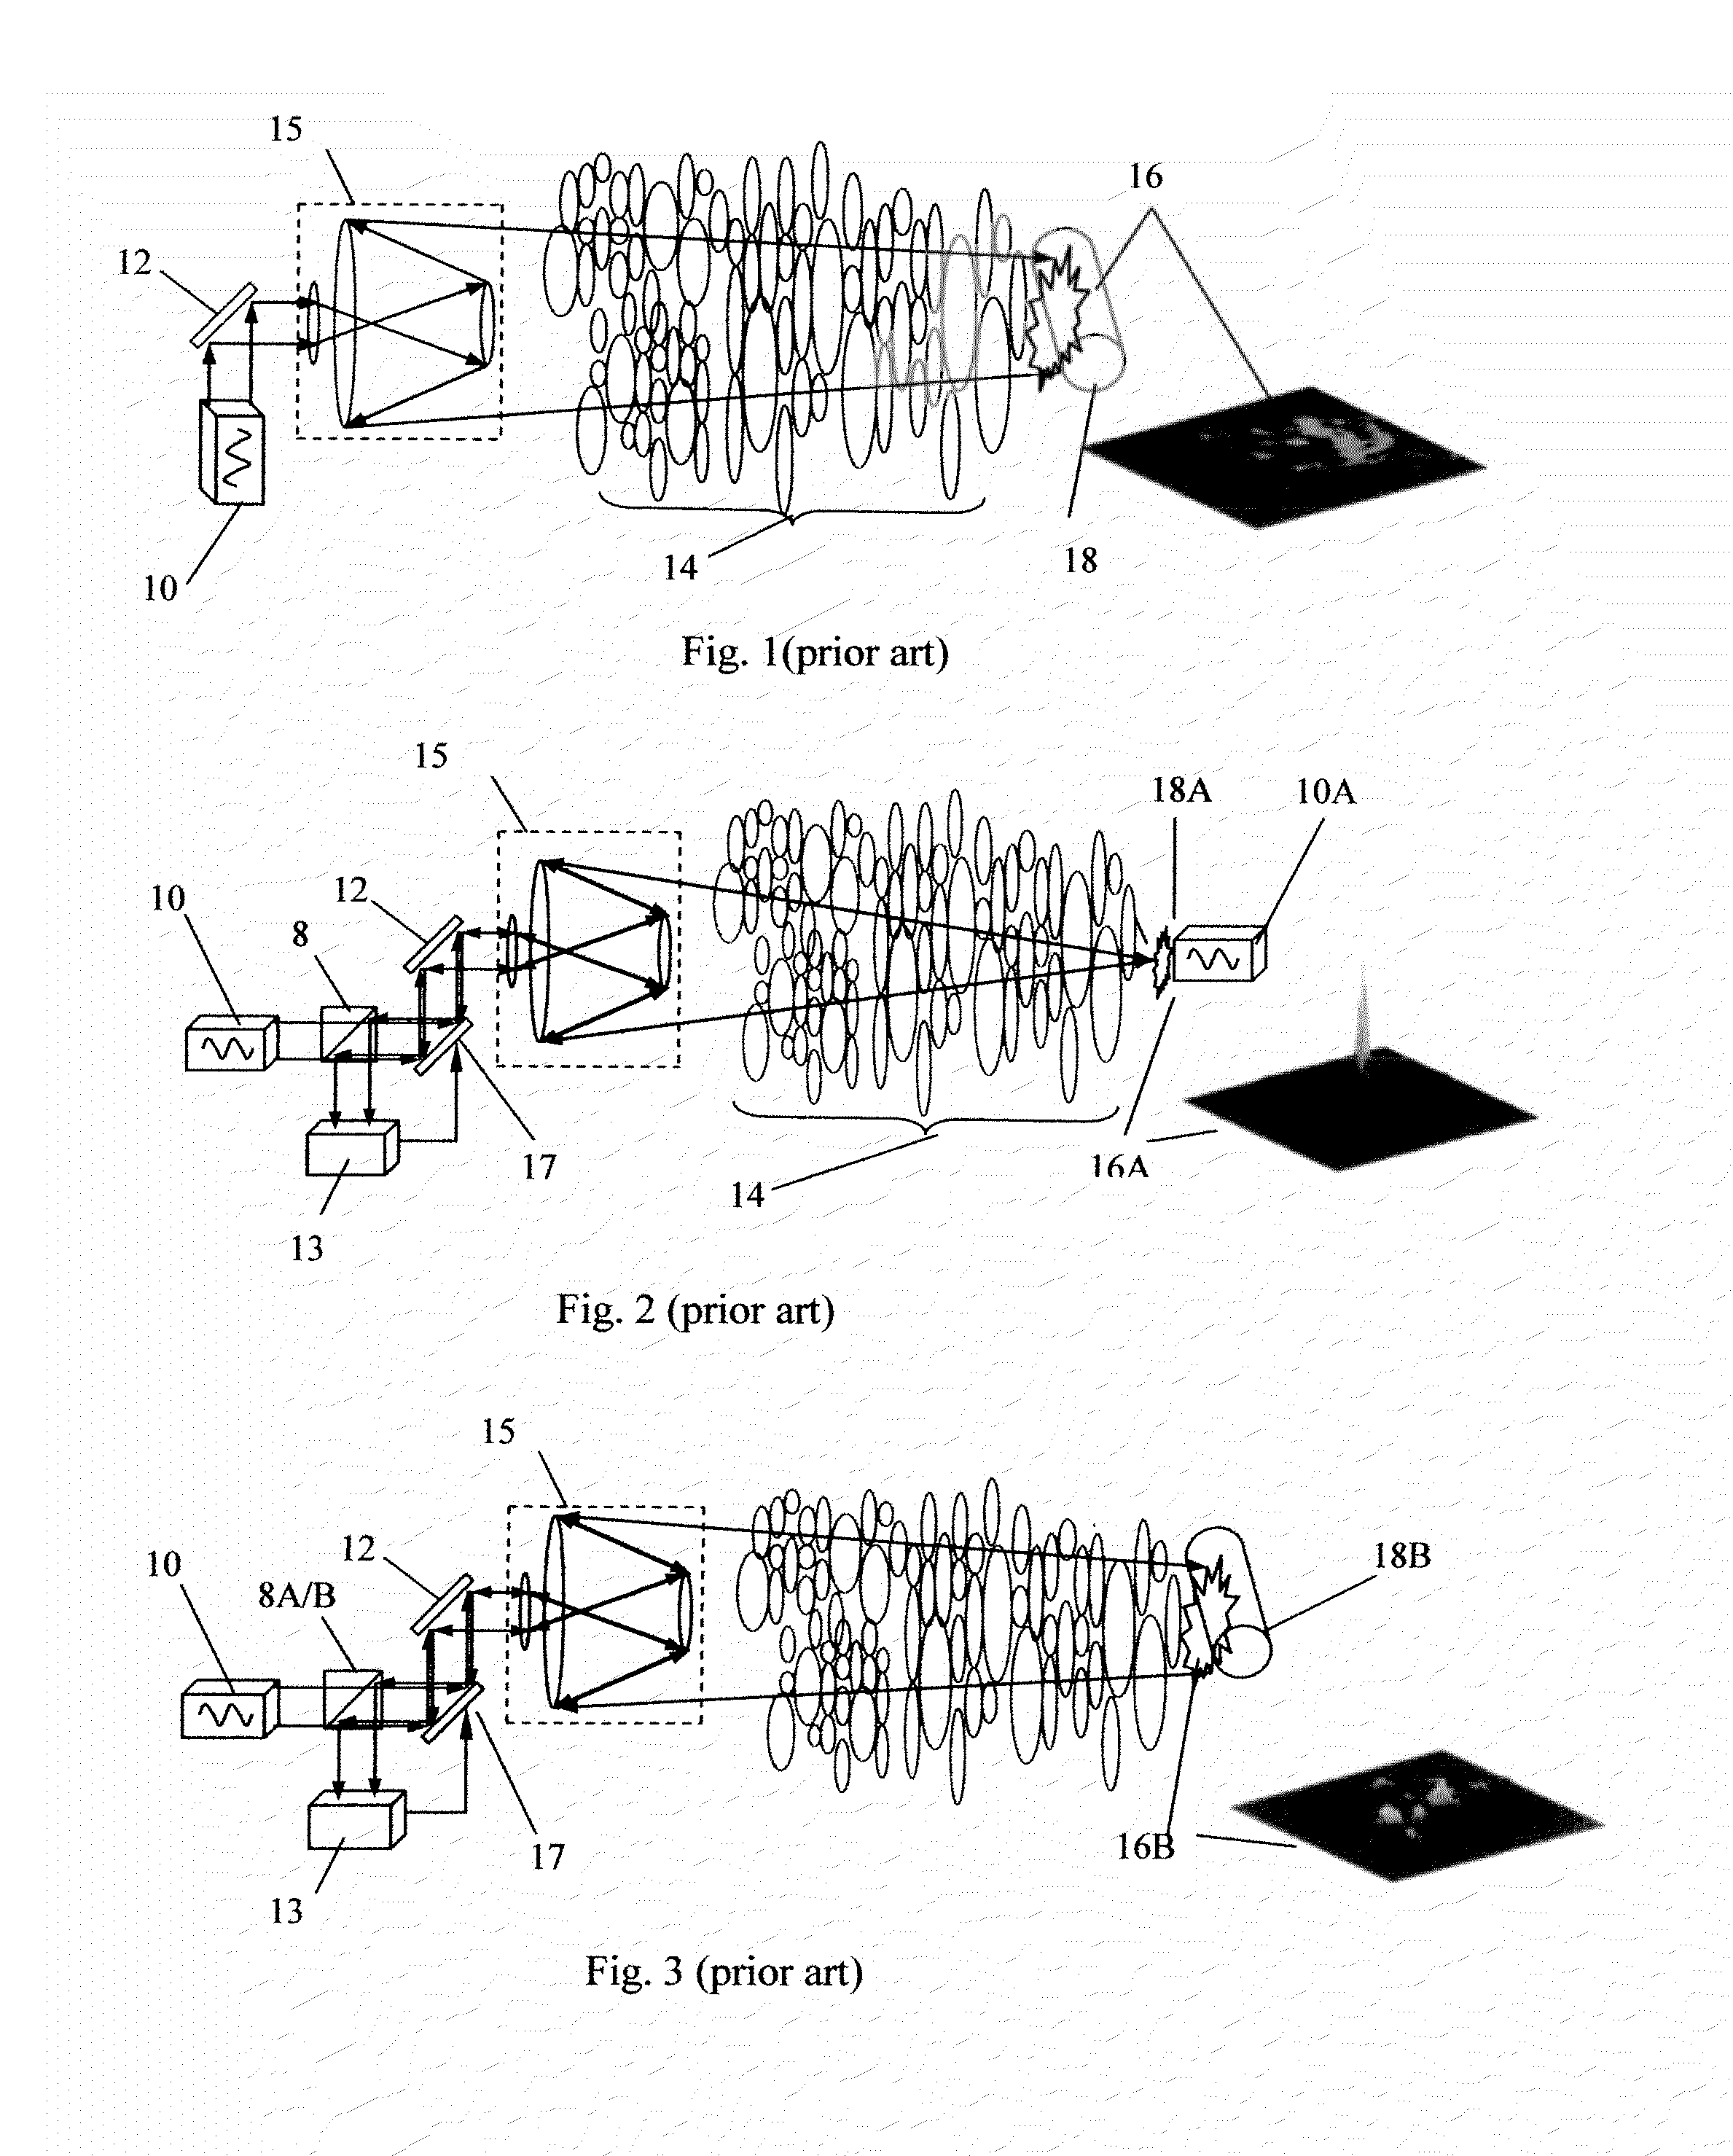 Non-cooperative laser target enhancement system and method